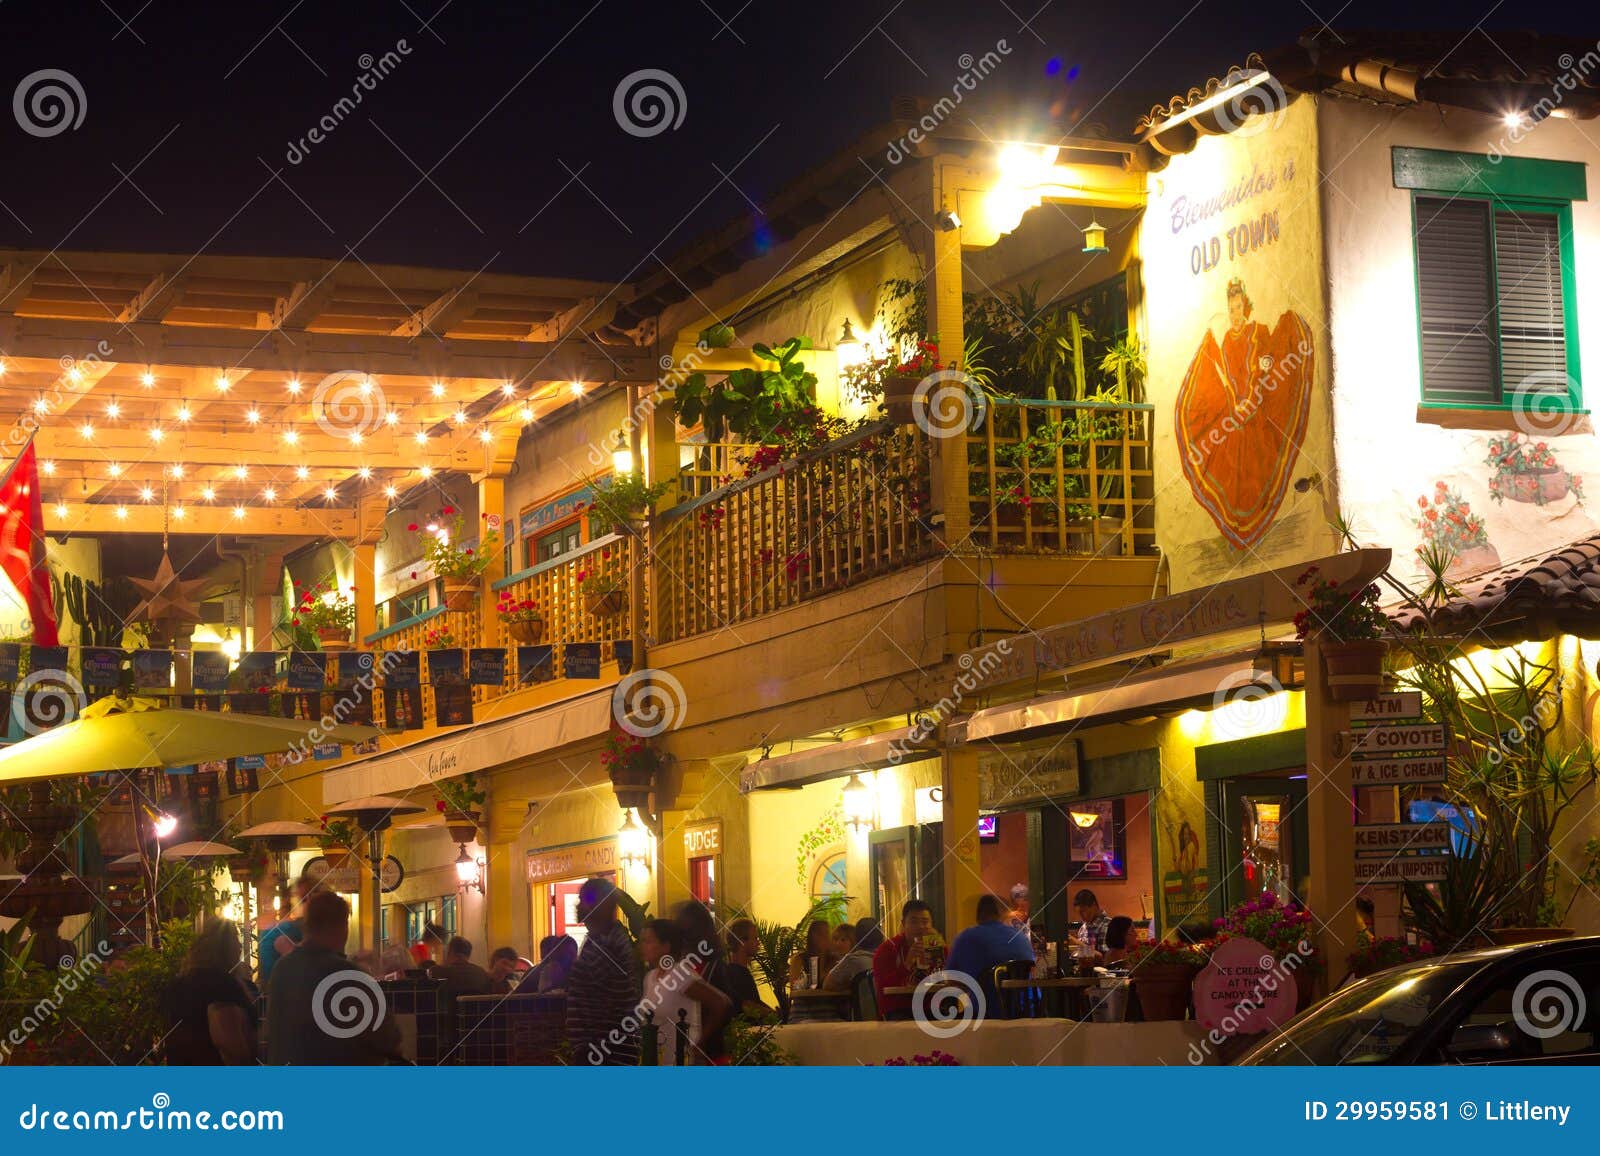 Old Town San Diego Editorial Photo - Image: 29959581